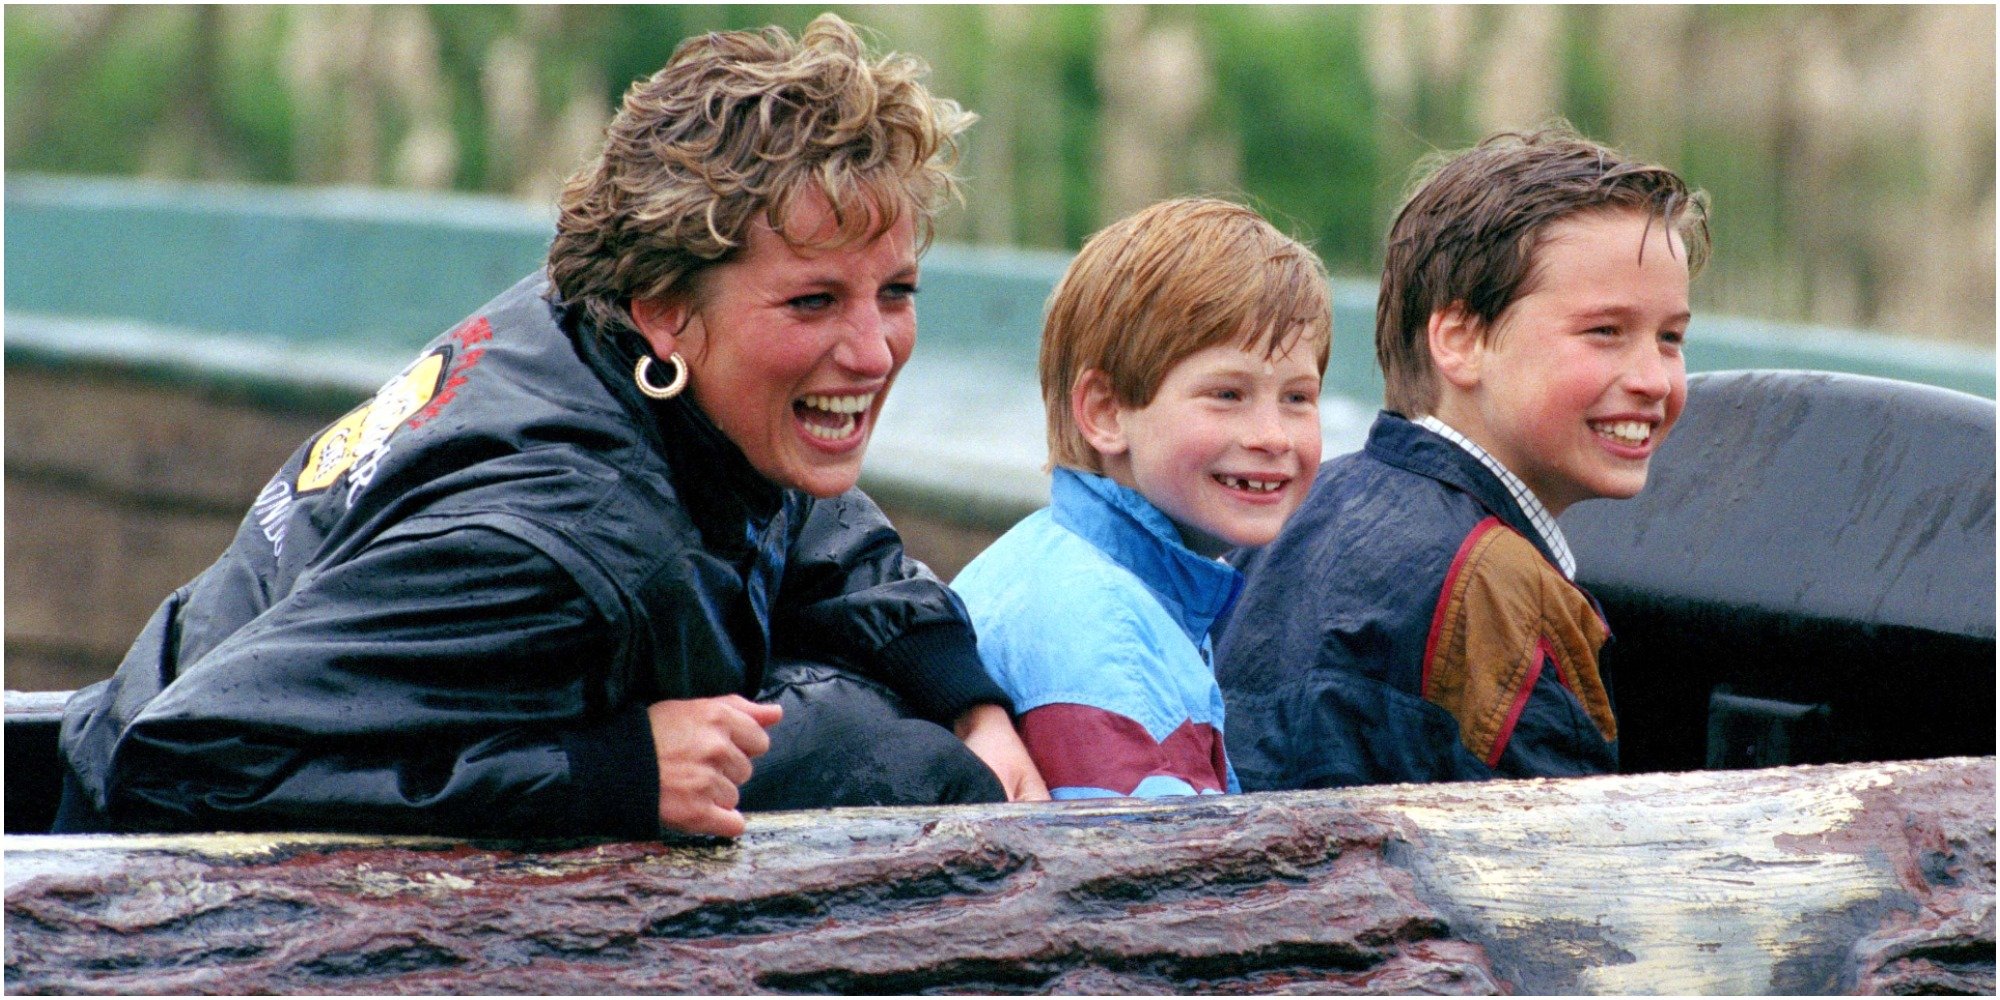 Princess Diana, Prince Harry and Prince William on a ride in a United Kingdom amusement park.